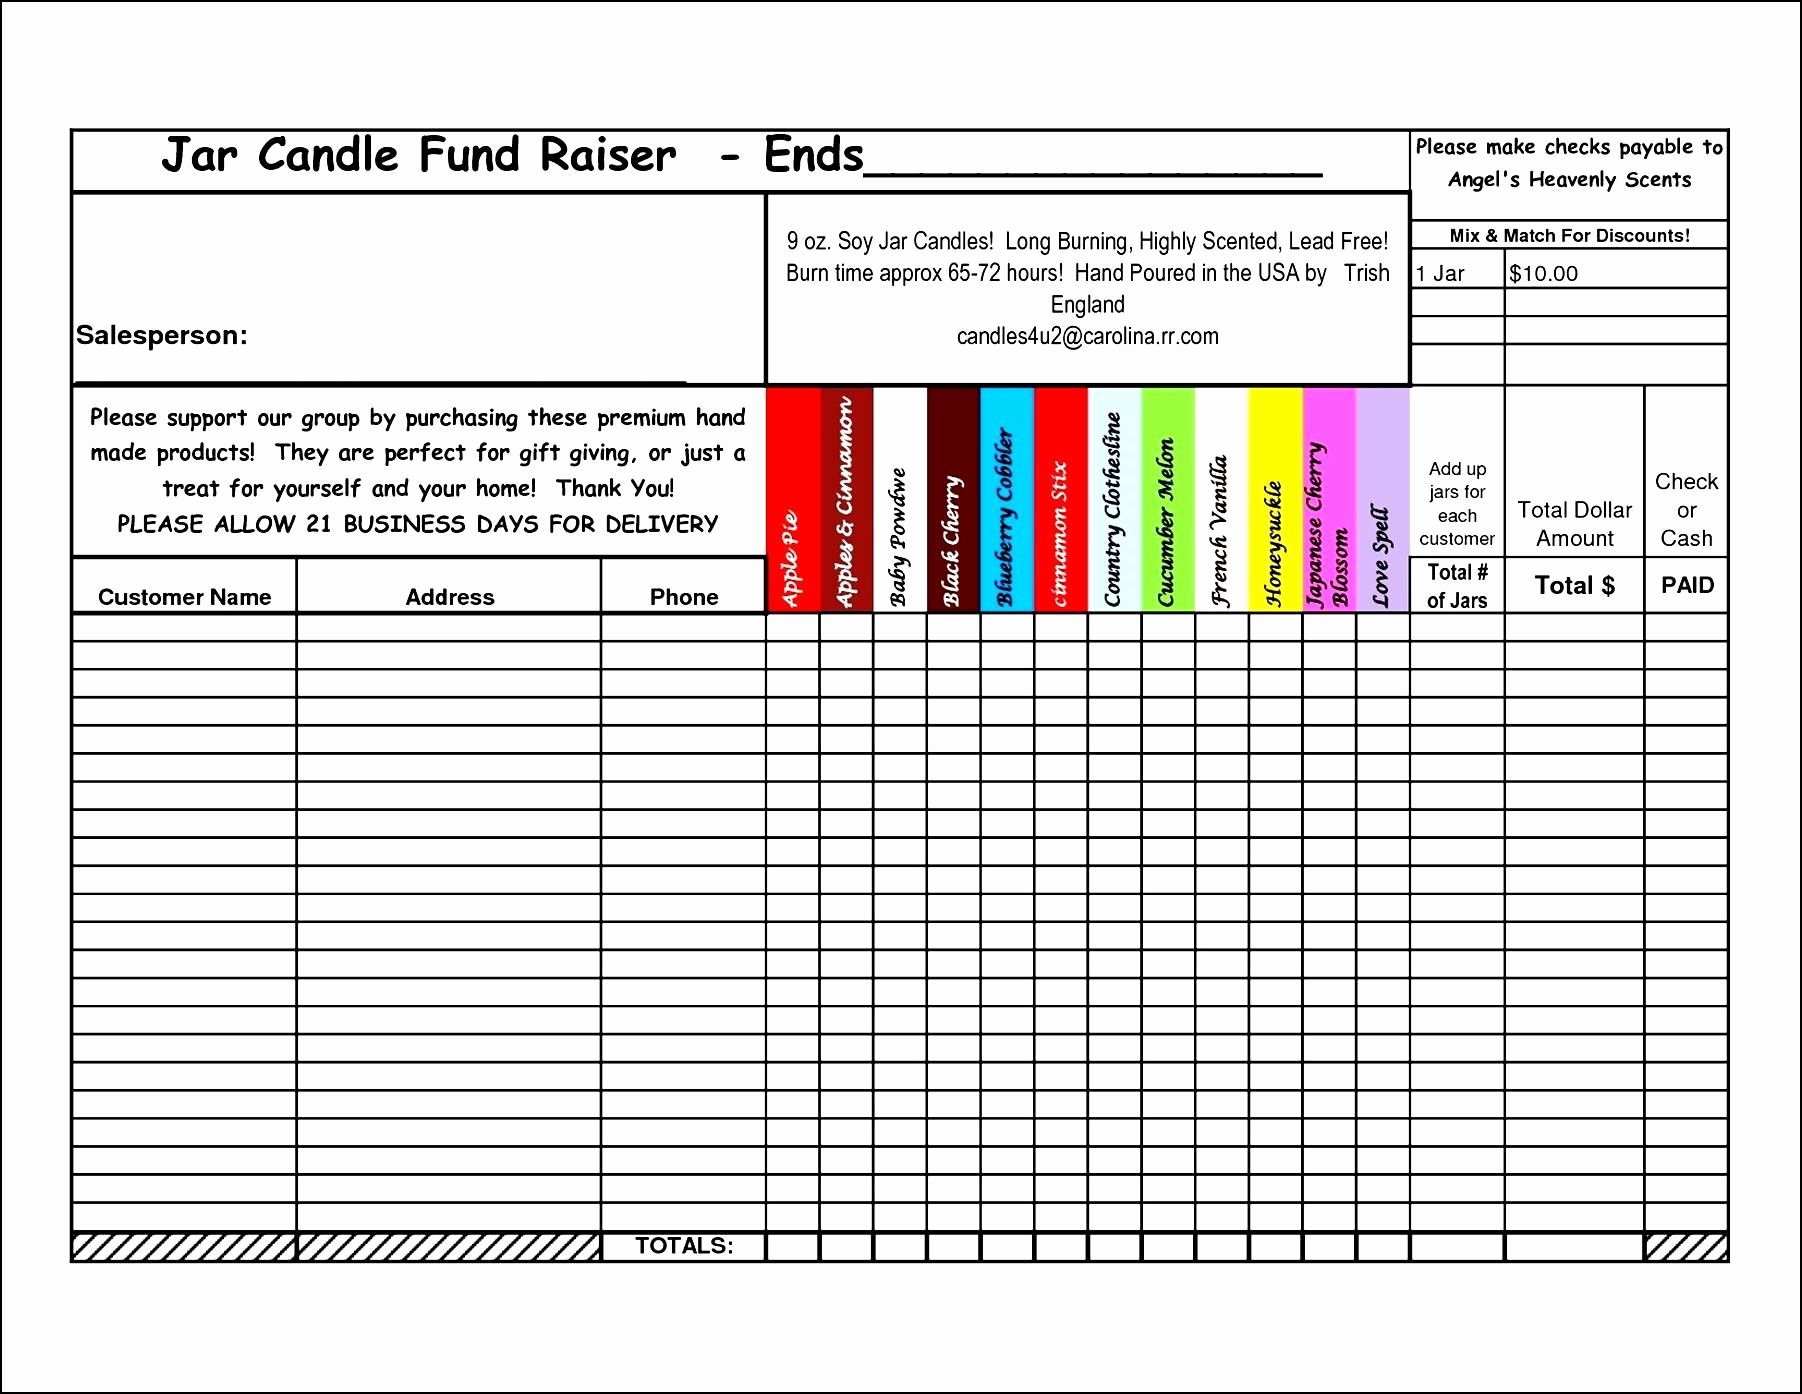 Fundraiser order form Template Fresh Candle Fundraiser order form Template